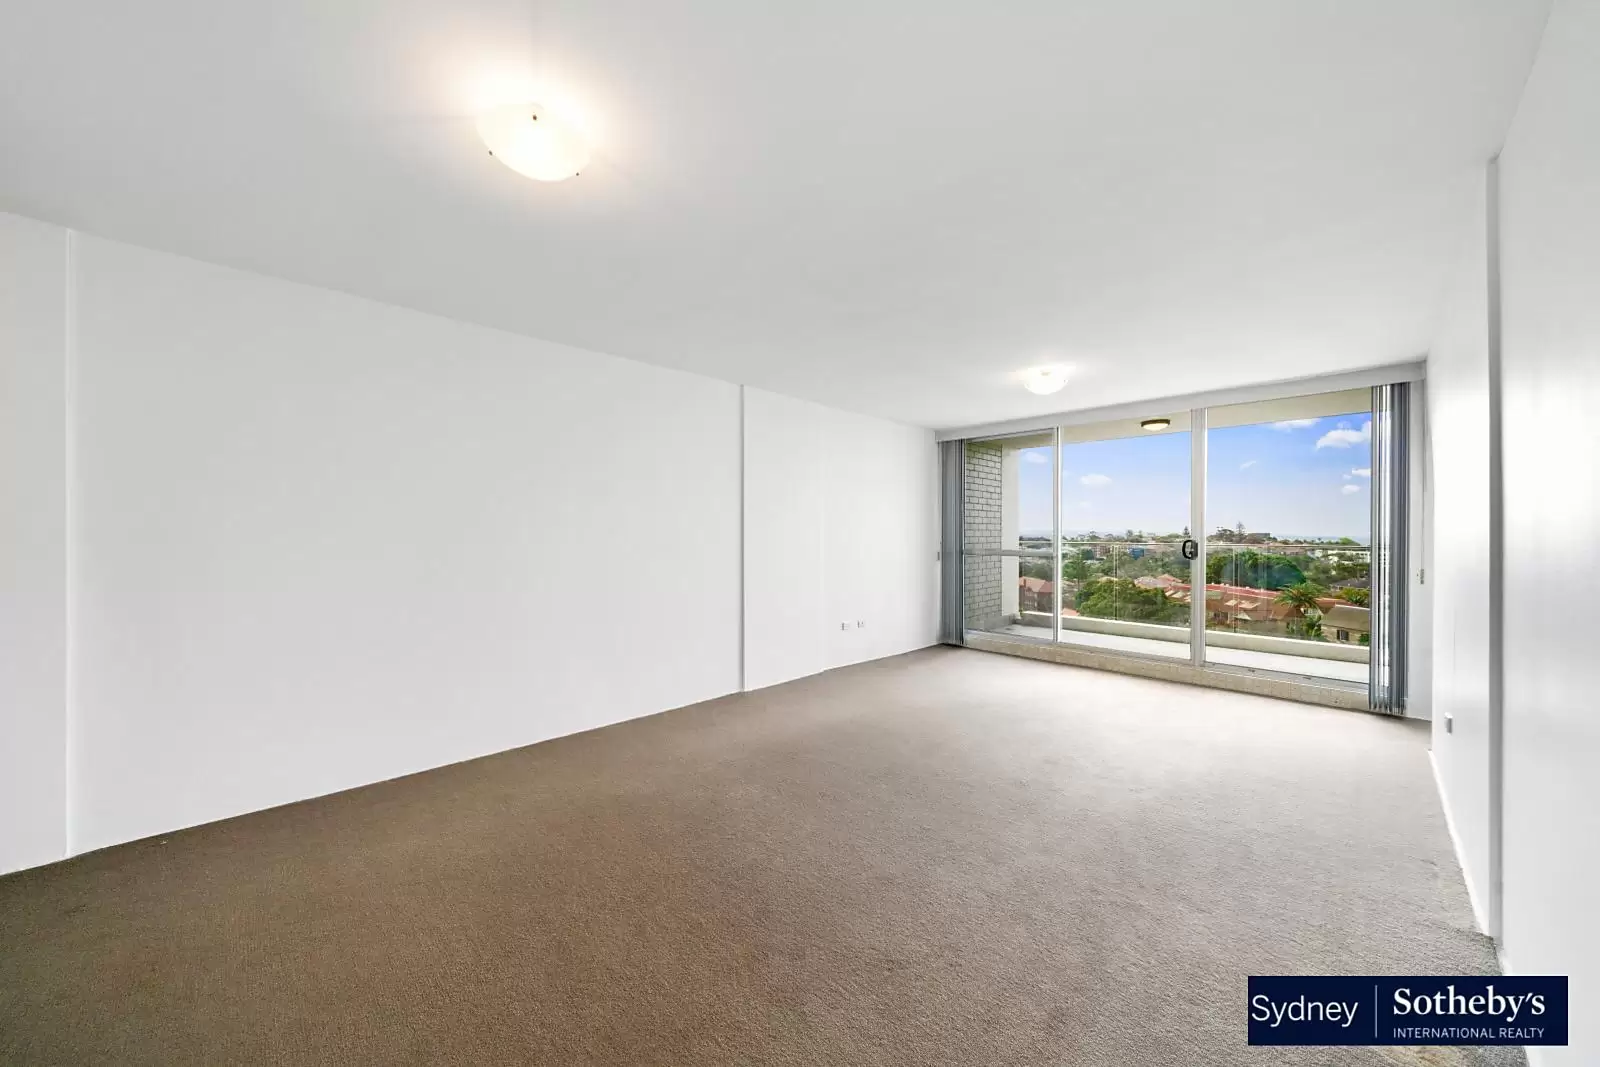 19/17-19 Gowrie Avenue, Bondi Junction Leased by Sydney Sotheby's International Realty - image 2